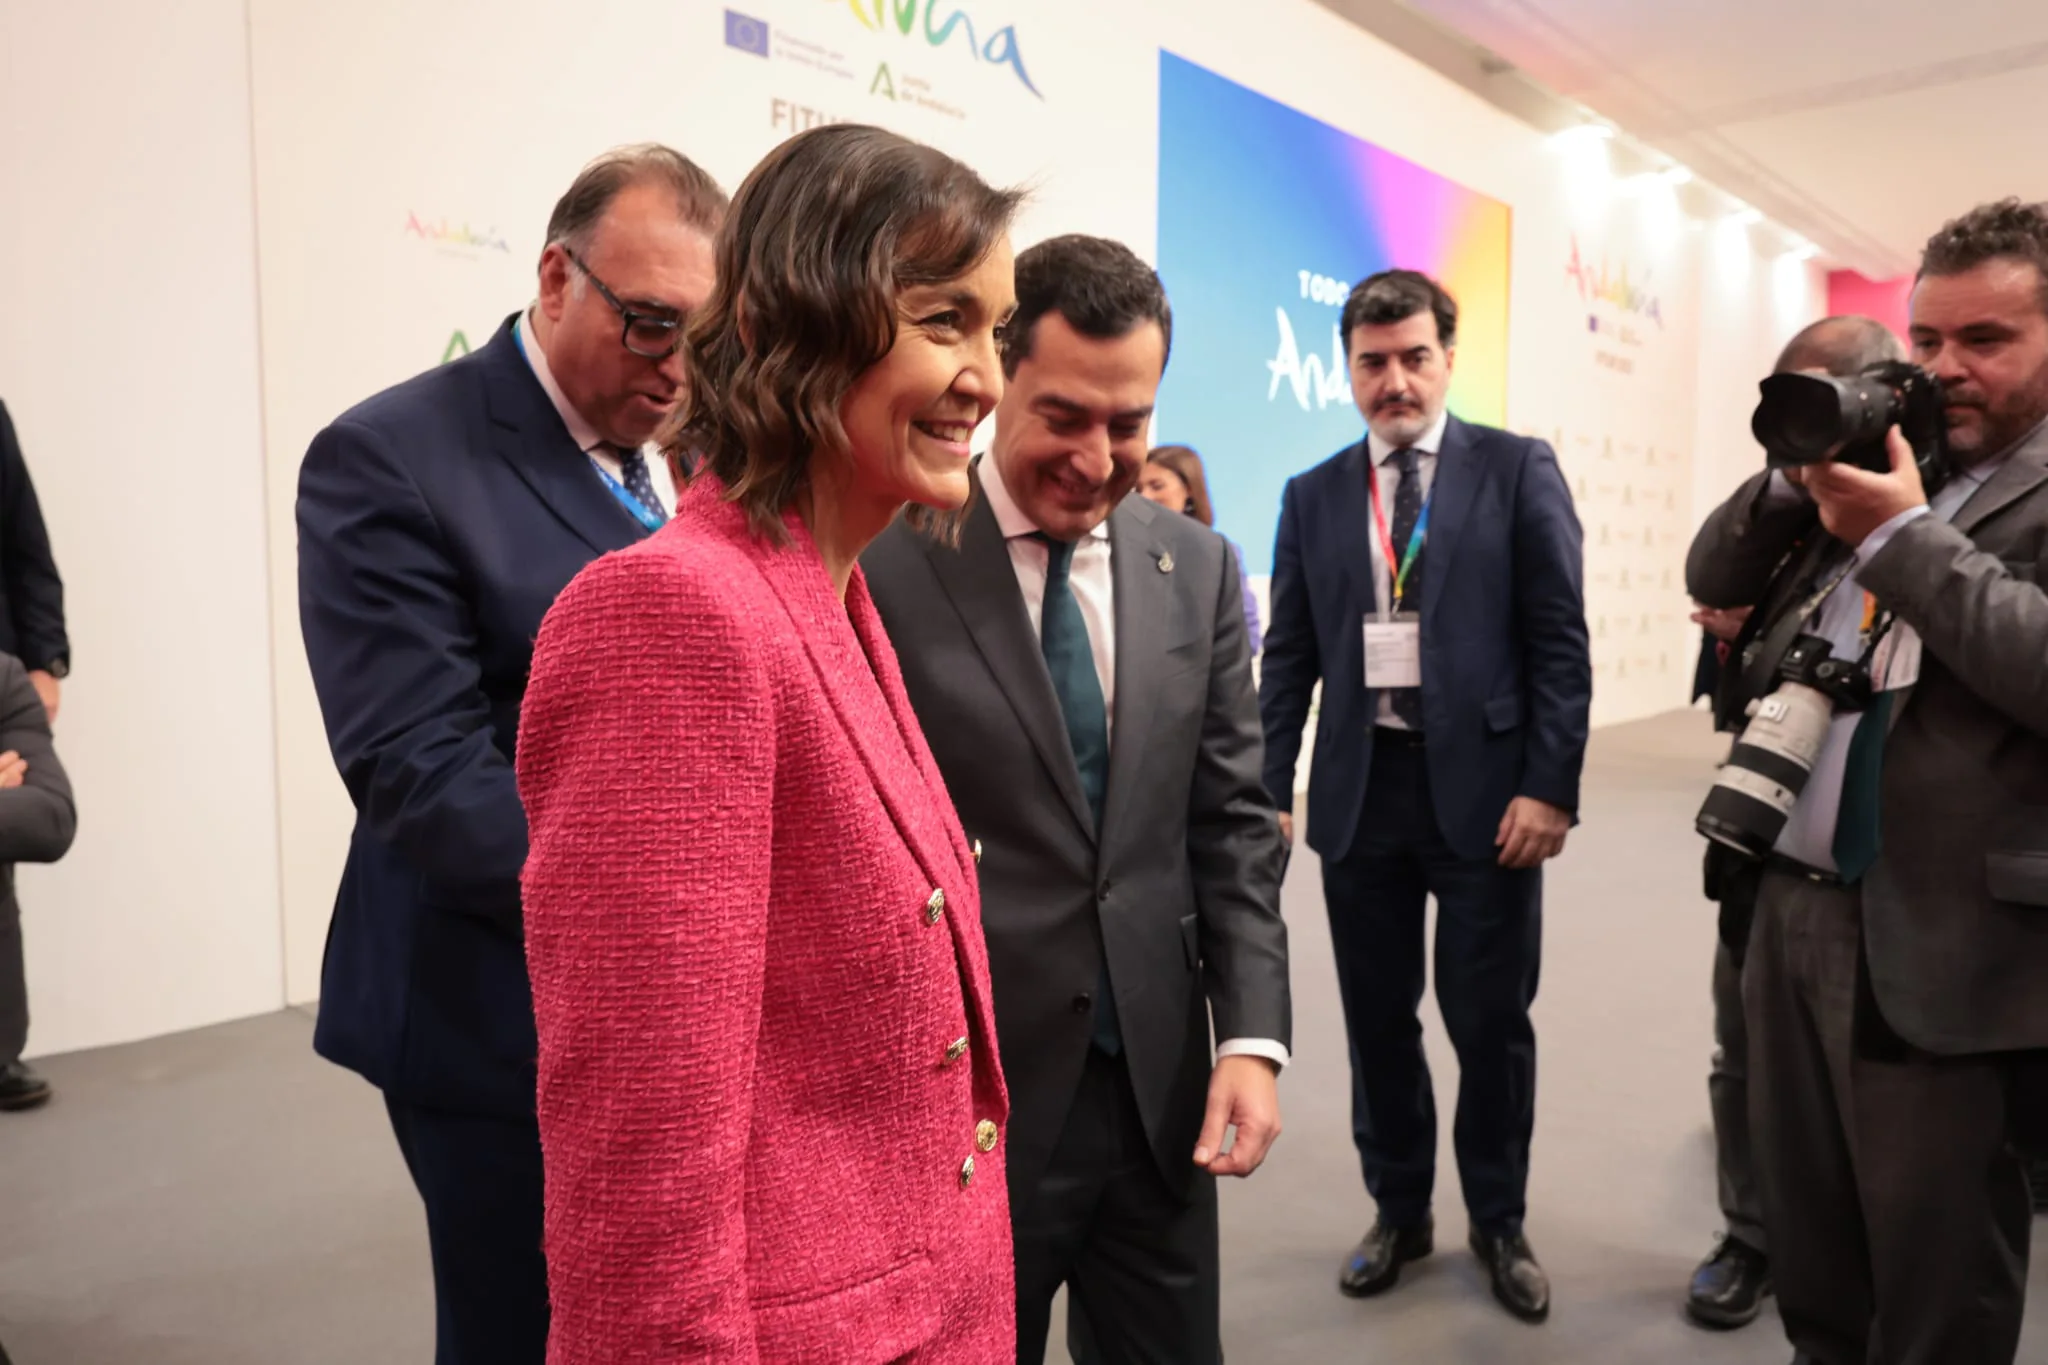 Andalucía's presence during the first day of Fitur